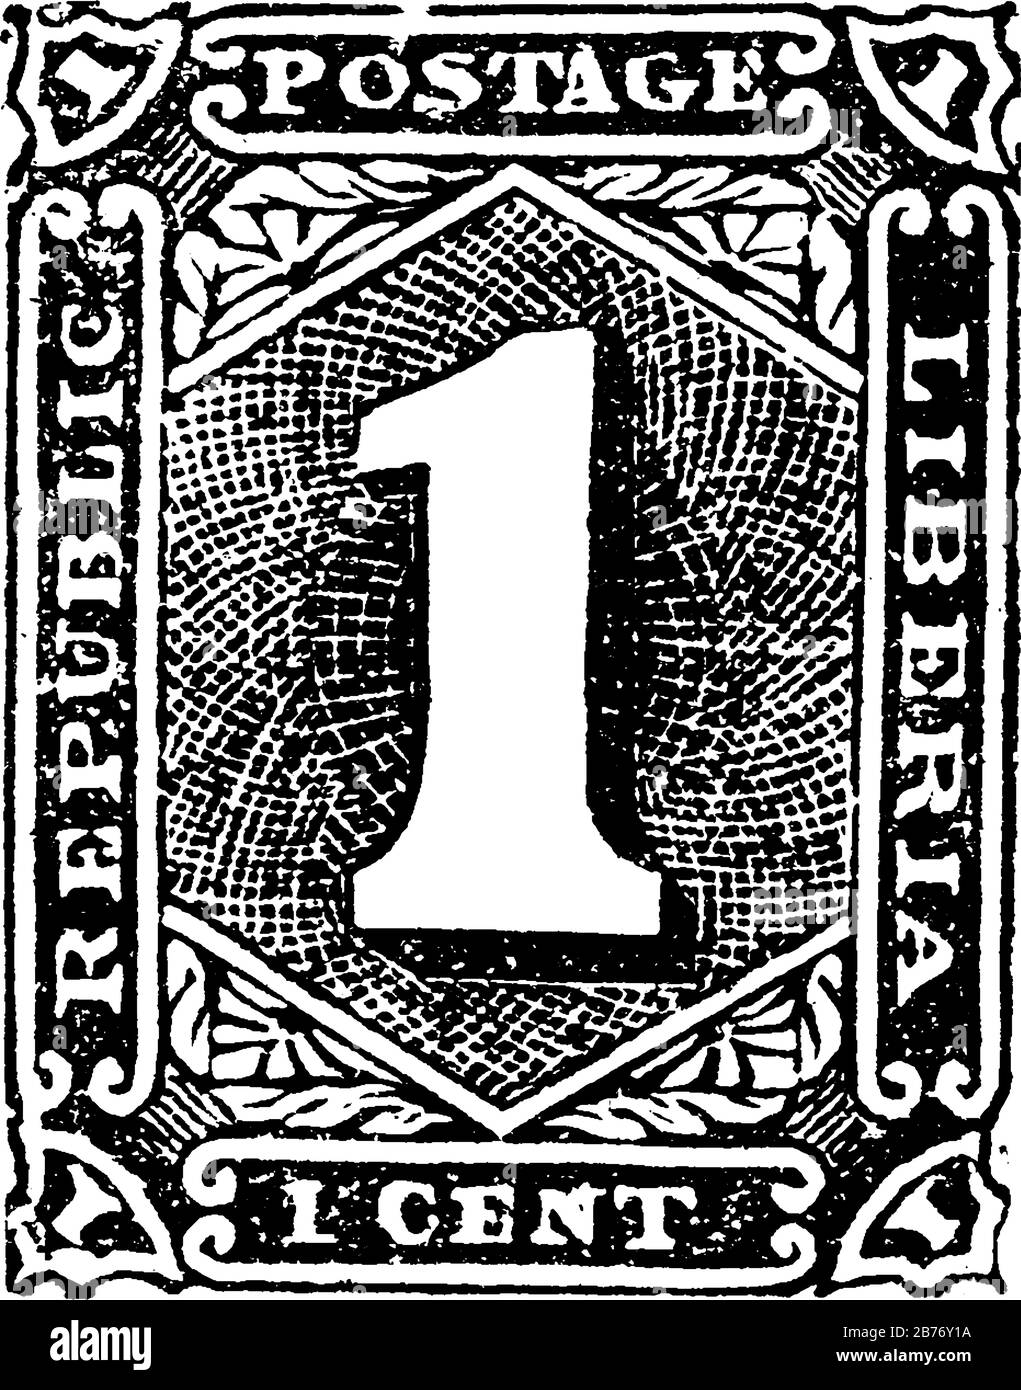 Liberia Stamp (1 cent) from 1885, a small adhesive piece of paper stuck to something to show an amount of money paid, mainly a postage stamp, vintage Stock Vector